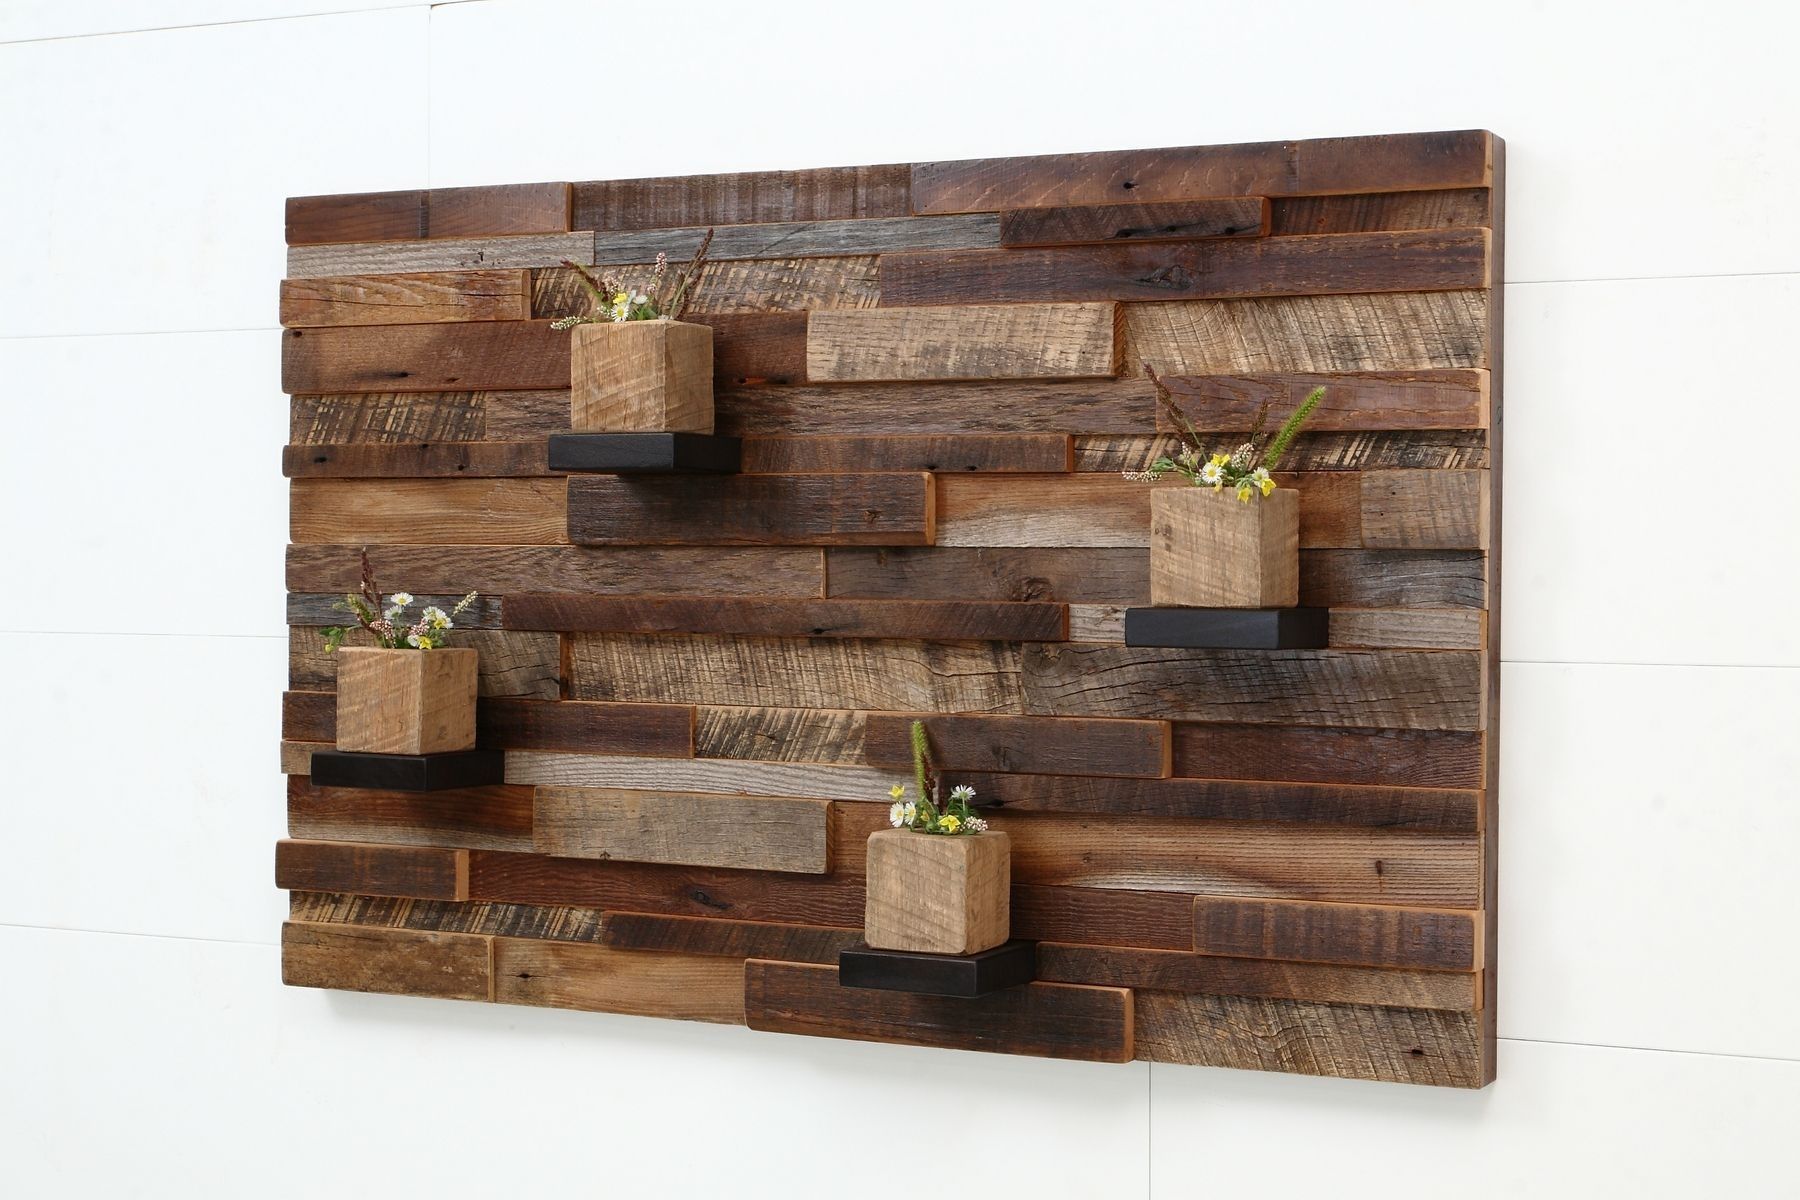 Hand Crafted Reclaimed Wood Wall Art Made Of Old Barnwood. Intended For Wooden Wall Art (Photo 4 of 20)